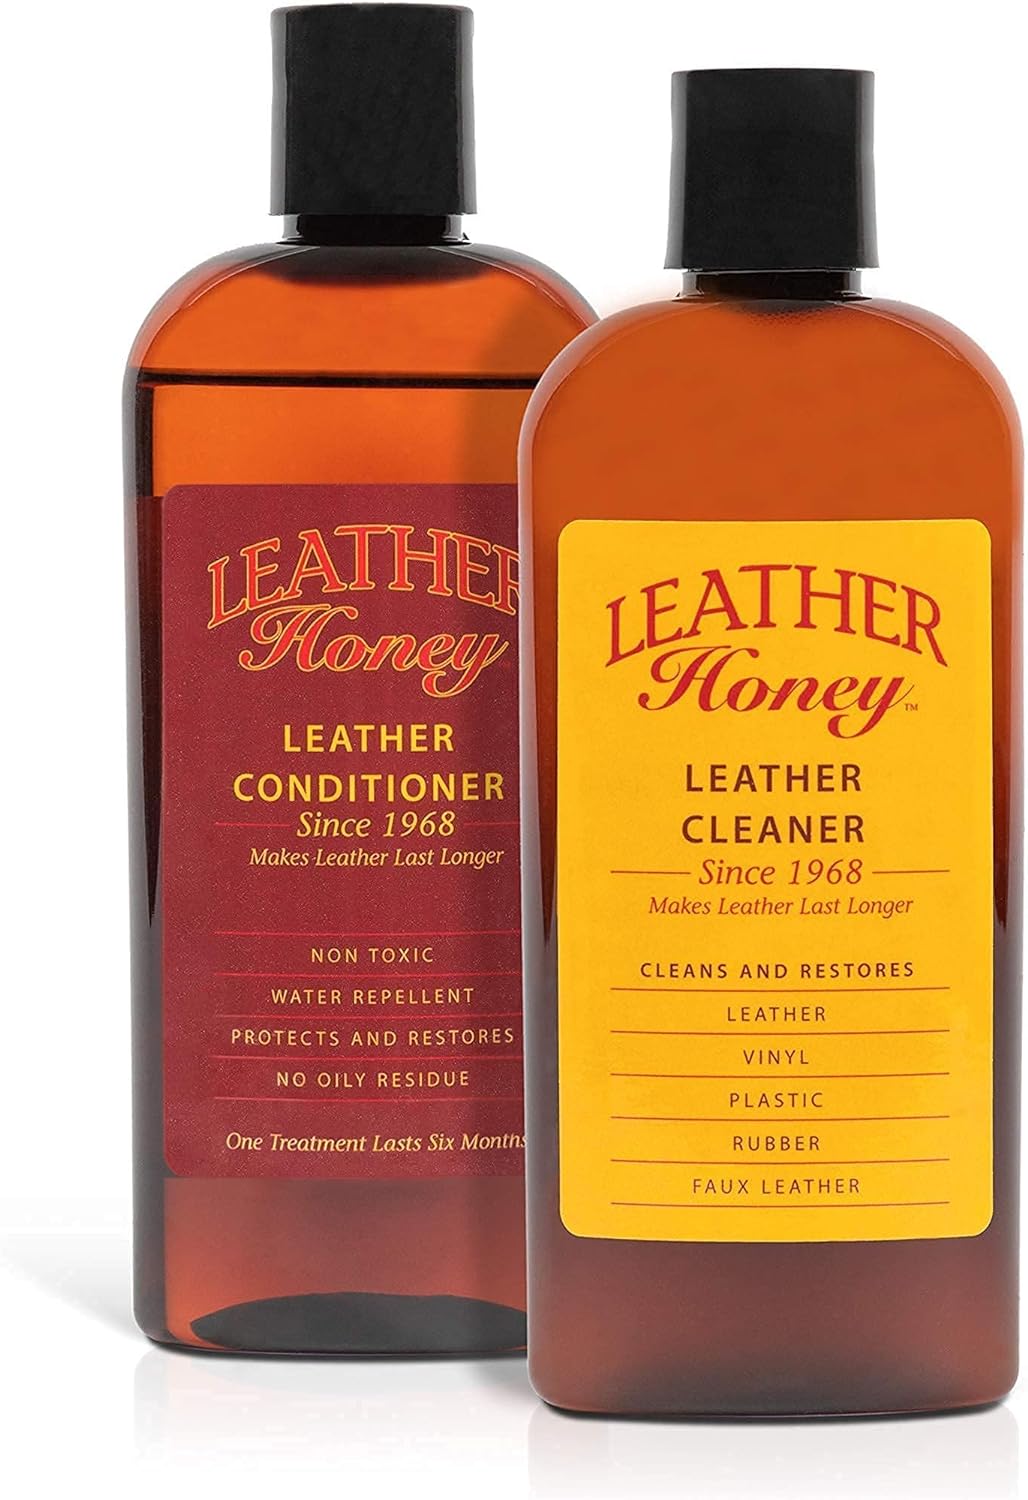 Leather Honey Complete Leather Care Kit Including 8 oz Cleaner and 8 oz Conditioner for use on Leather Apparel, Furniture, Auto Interiors, Sh